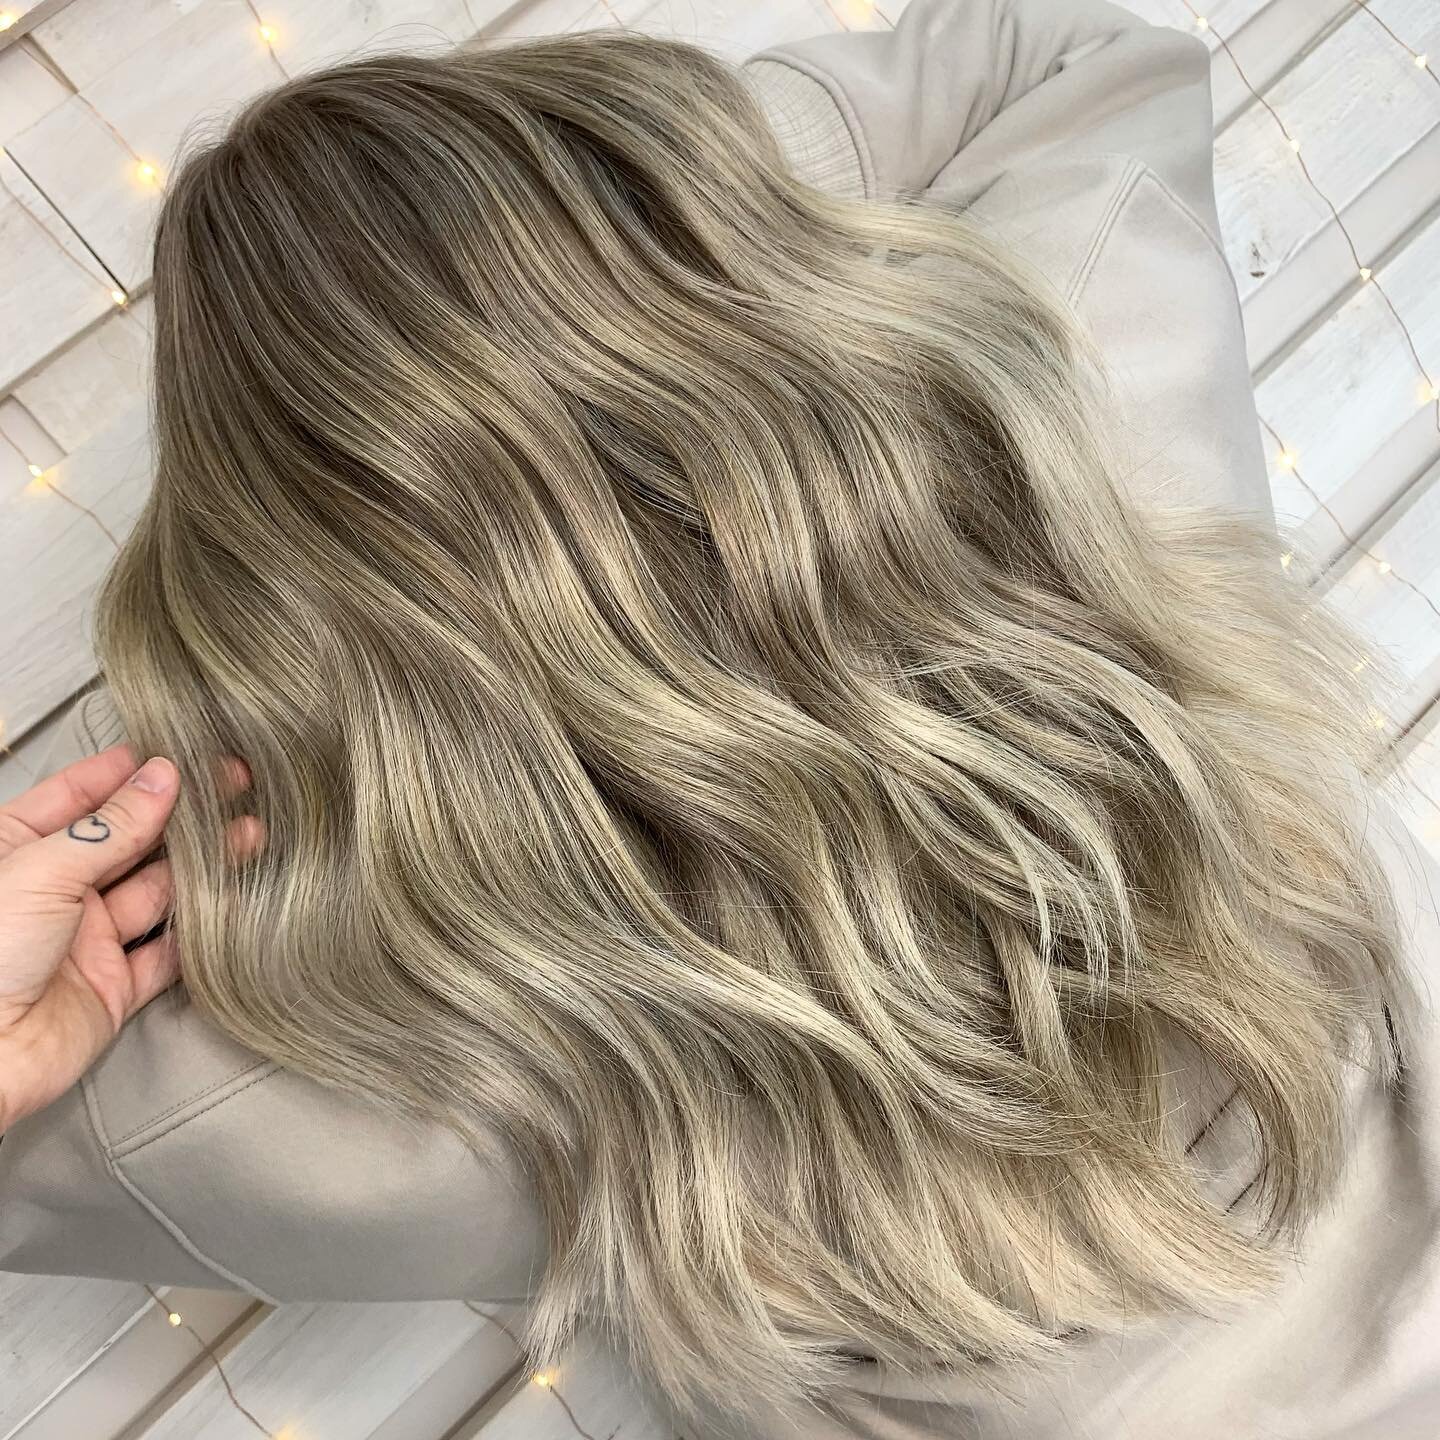 Beachy hair is getting me so excited for summer!
Air touch balayage with soft vanilla tones and a few extensions to thicken the base, we&rsquo;re ready for the pina coladas and sunshine 🌞